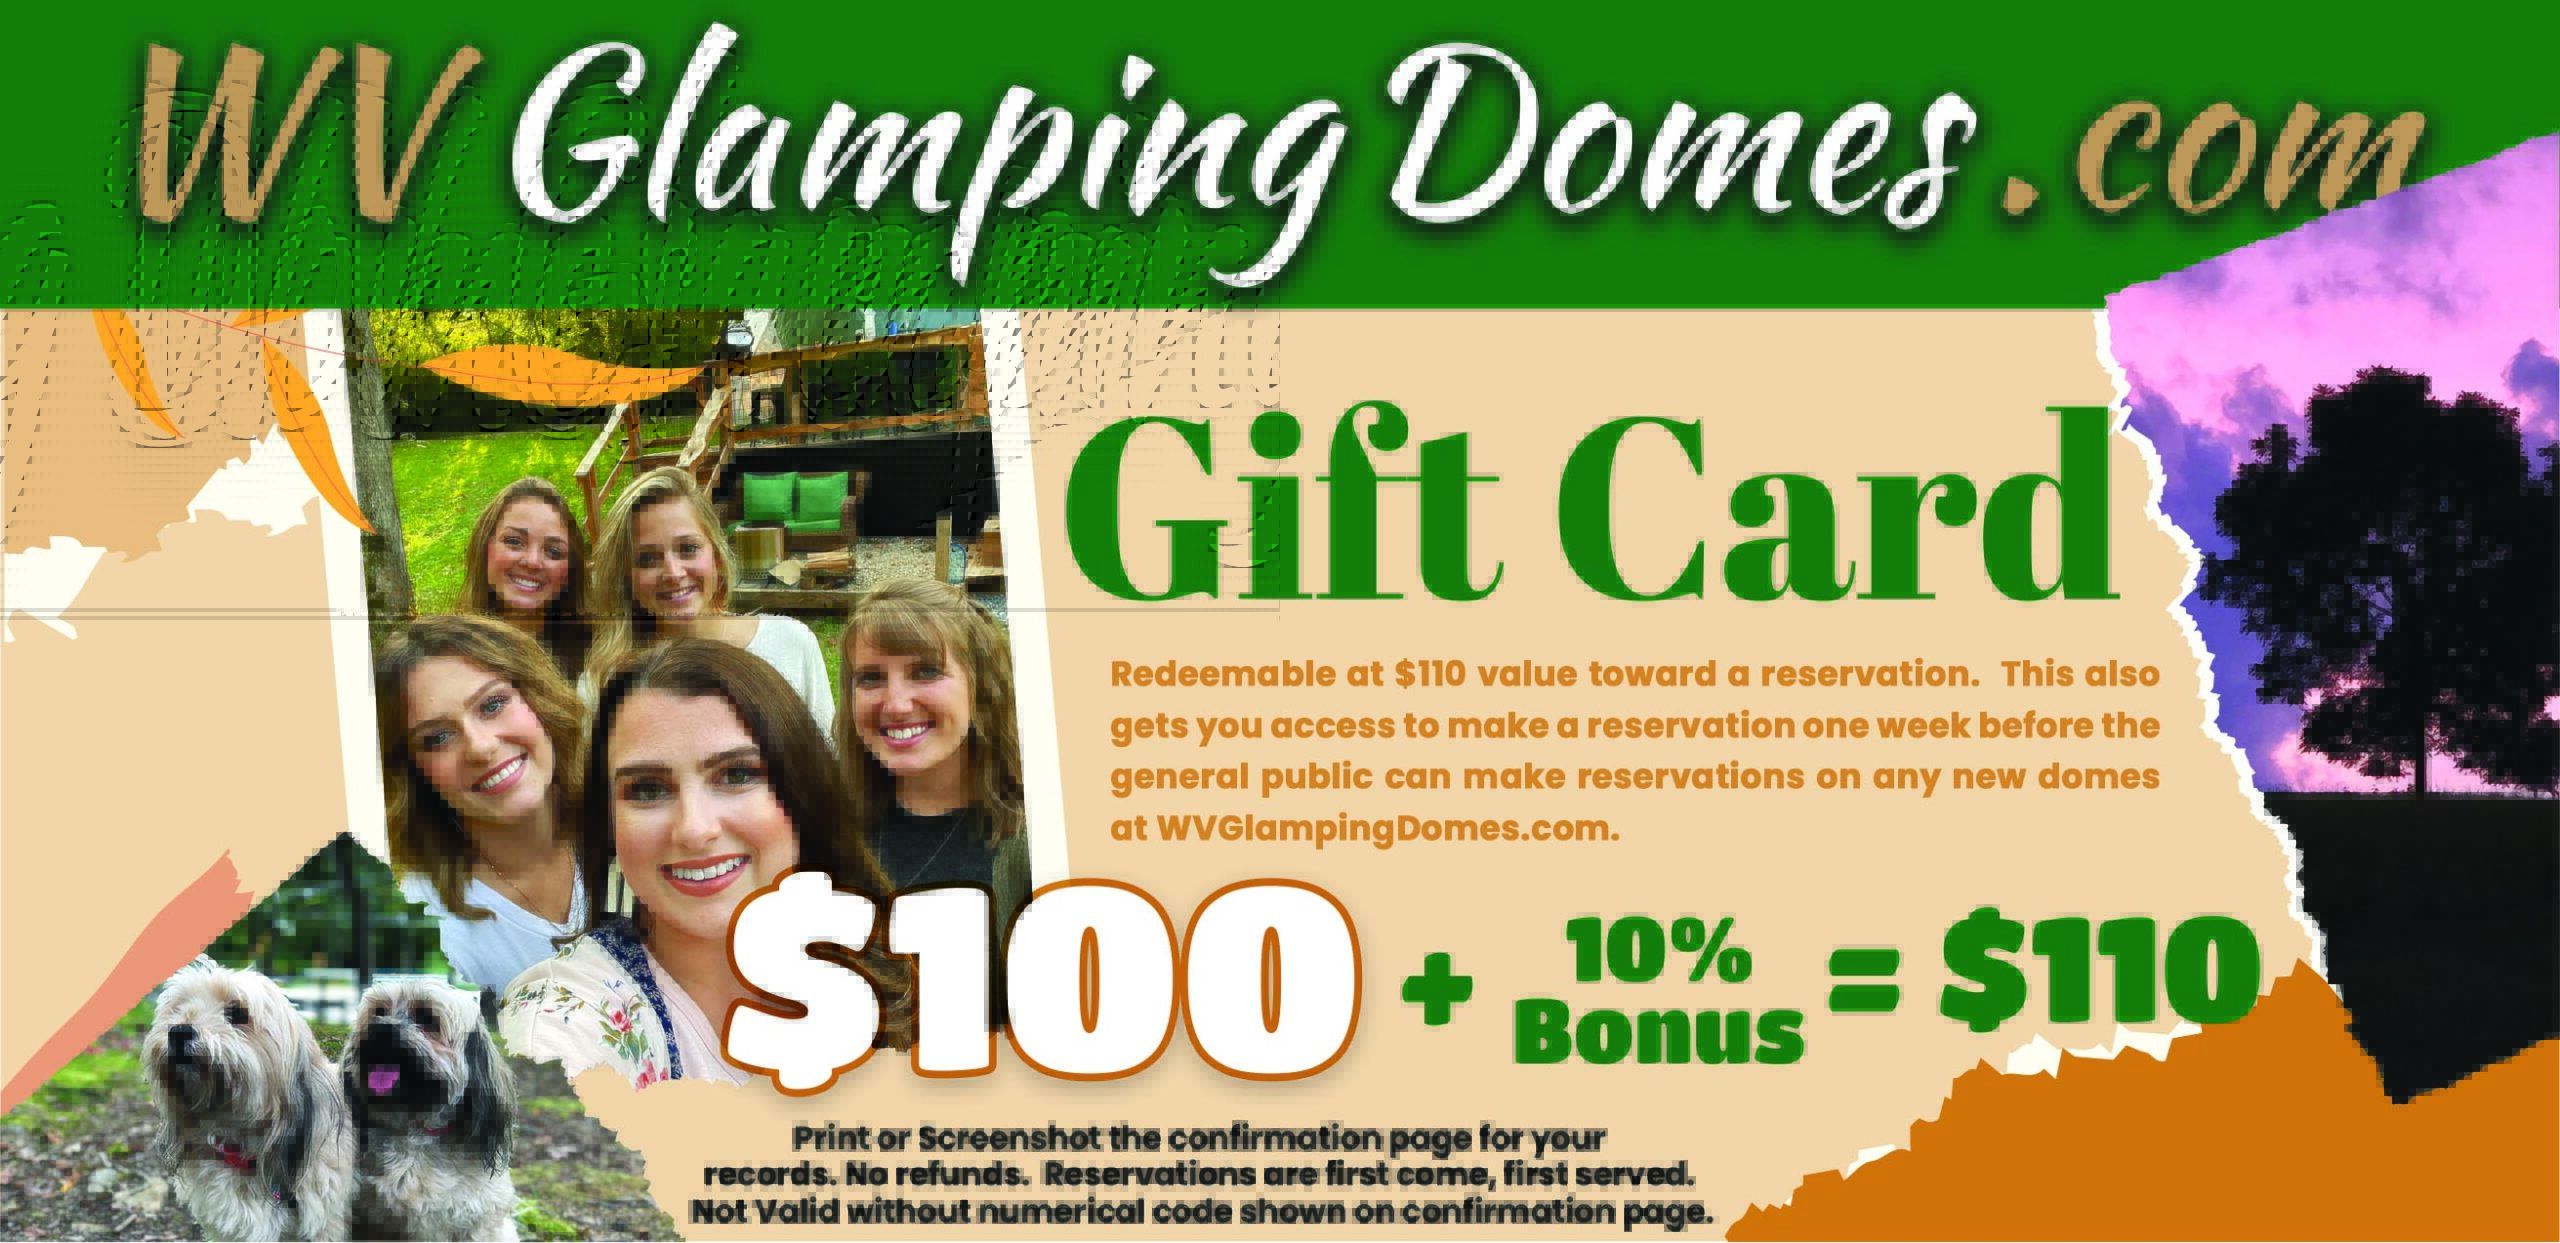 Glamping Dome Give Card